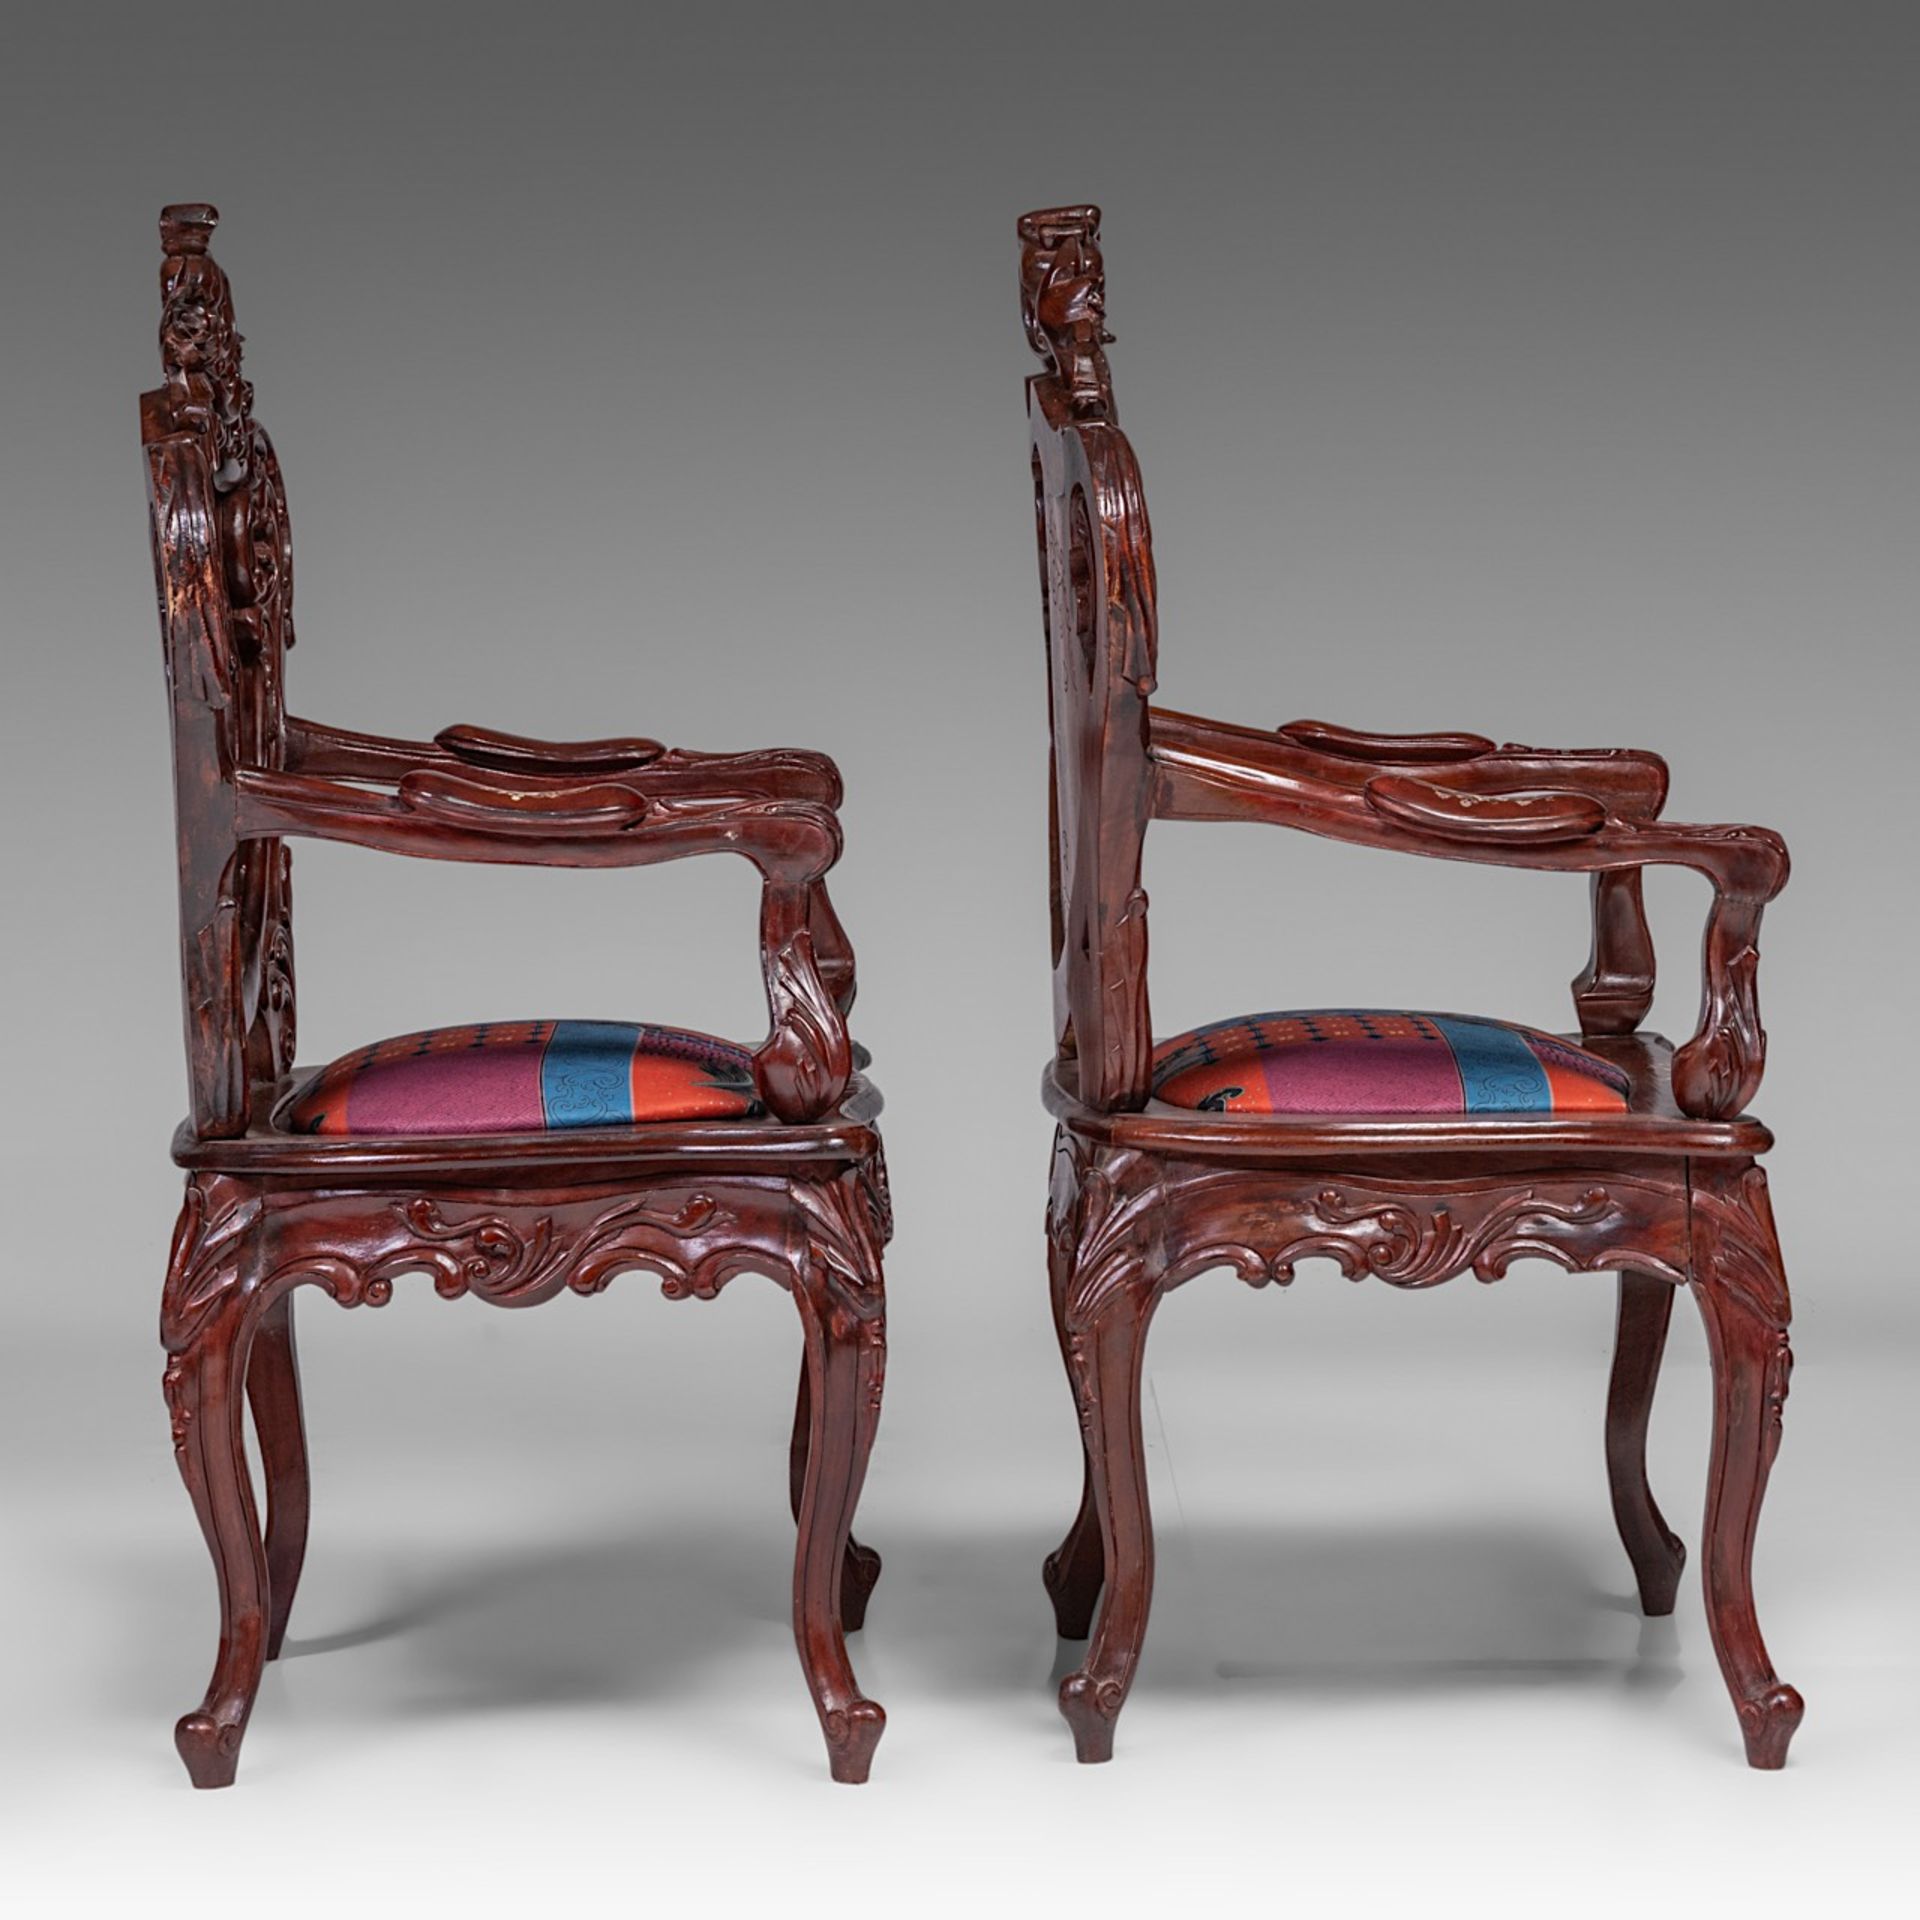 An Anglo-Chinese settee and two chairs, H settee 132 - H chair 108 cm - Image 10 of 24